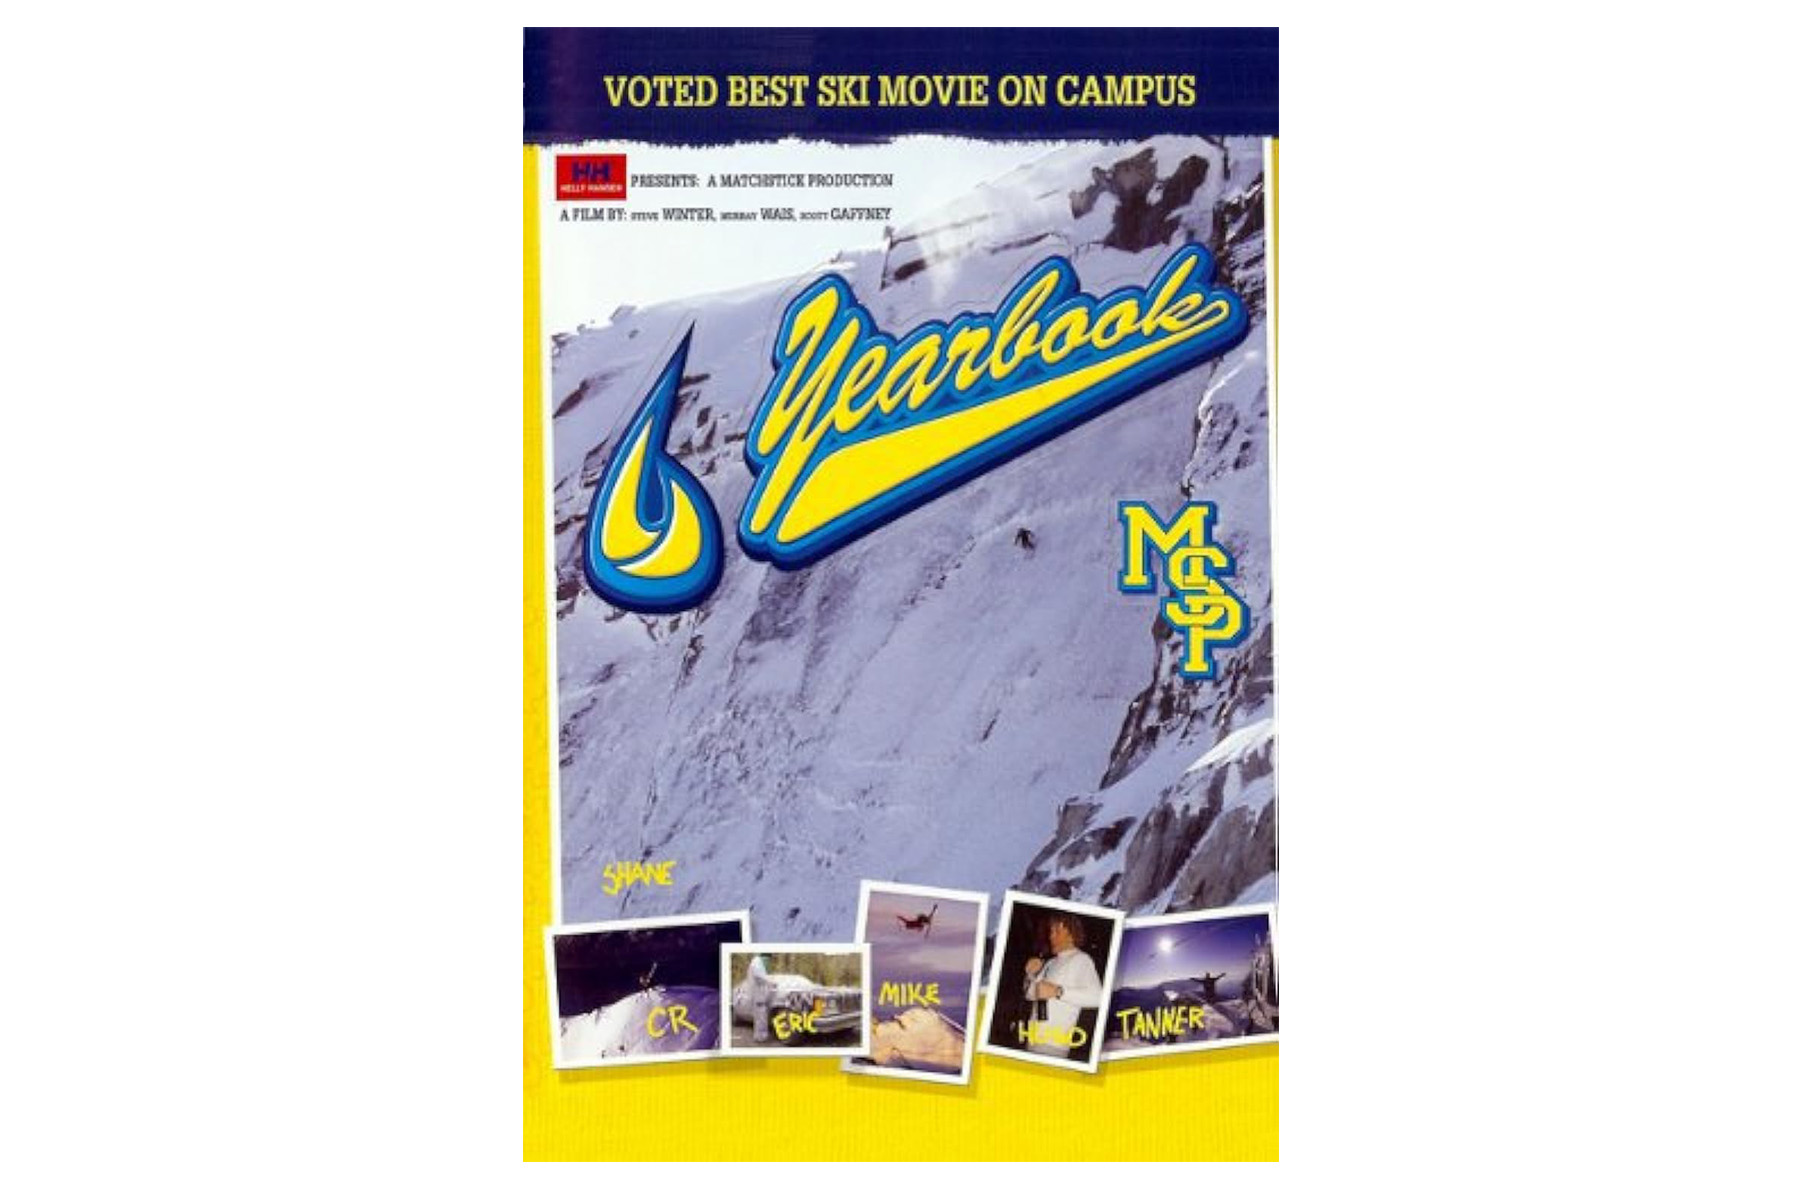 On the Blister Cinematic Podcast, Cody and Jonathan dissect MSP's iconic 2004 film, Yearbook, and discuss its most memorable segments, its impact on the sport, who won the movie, and more.